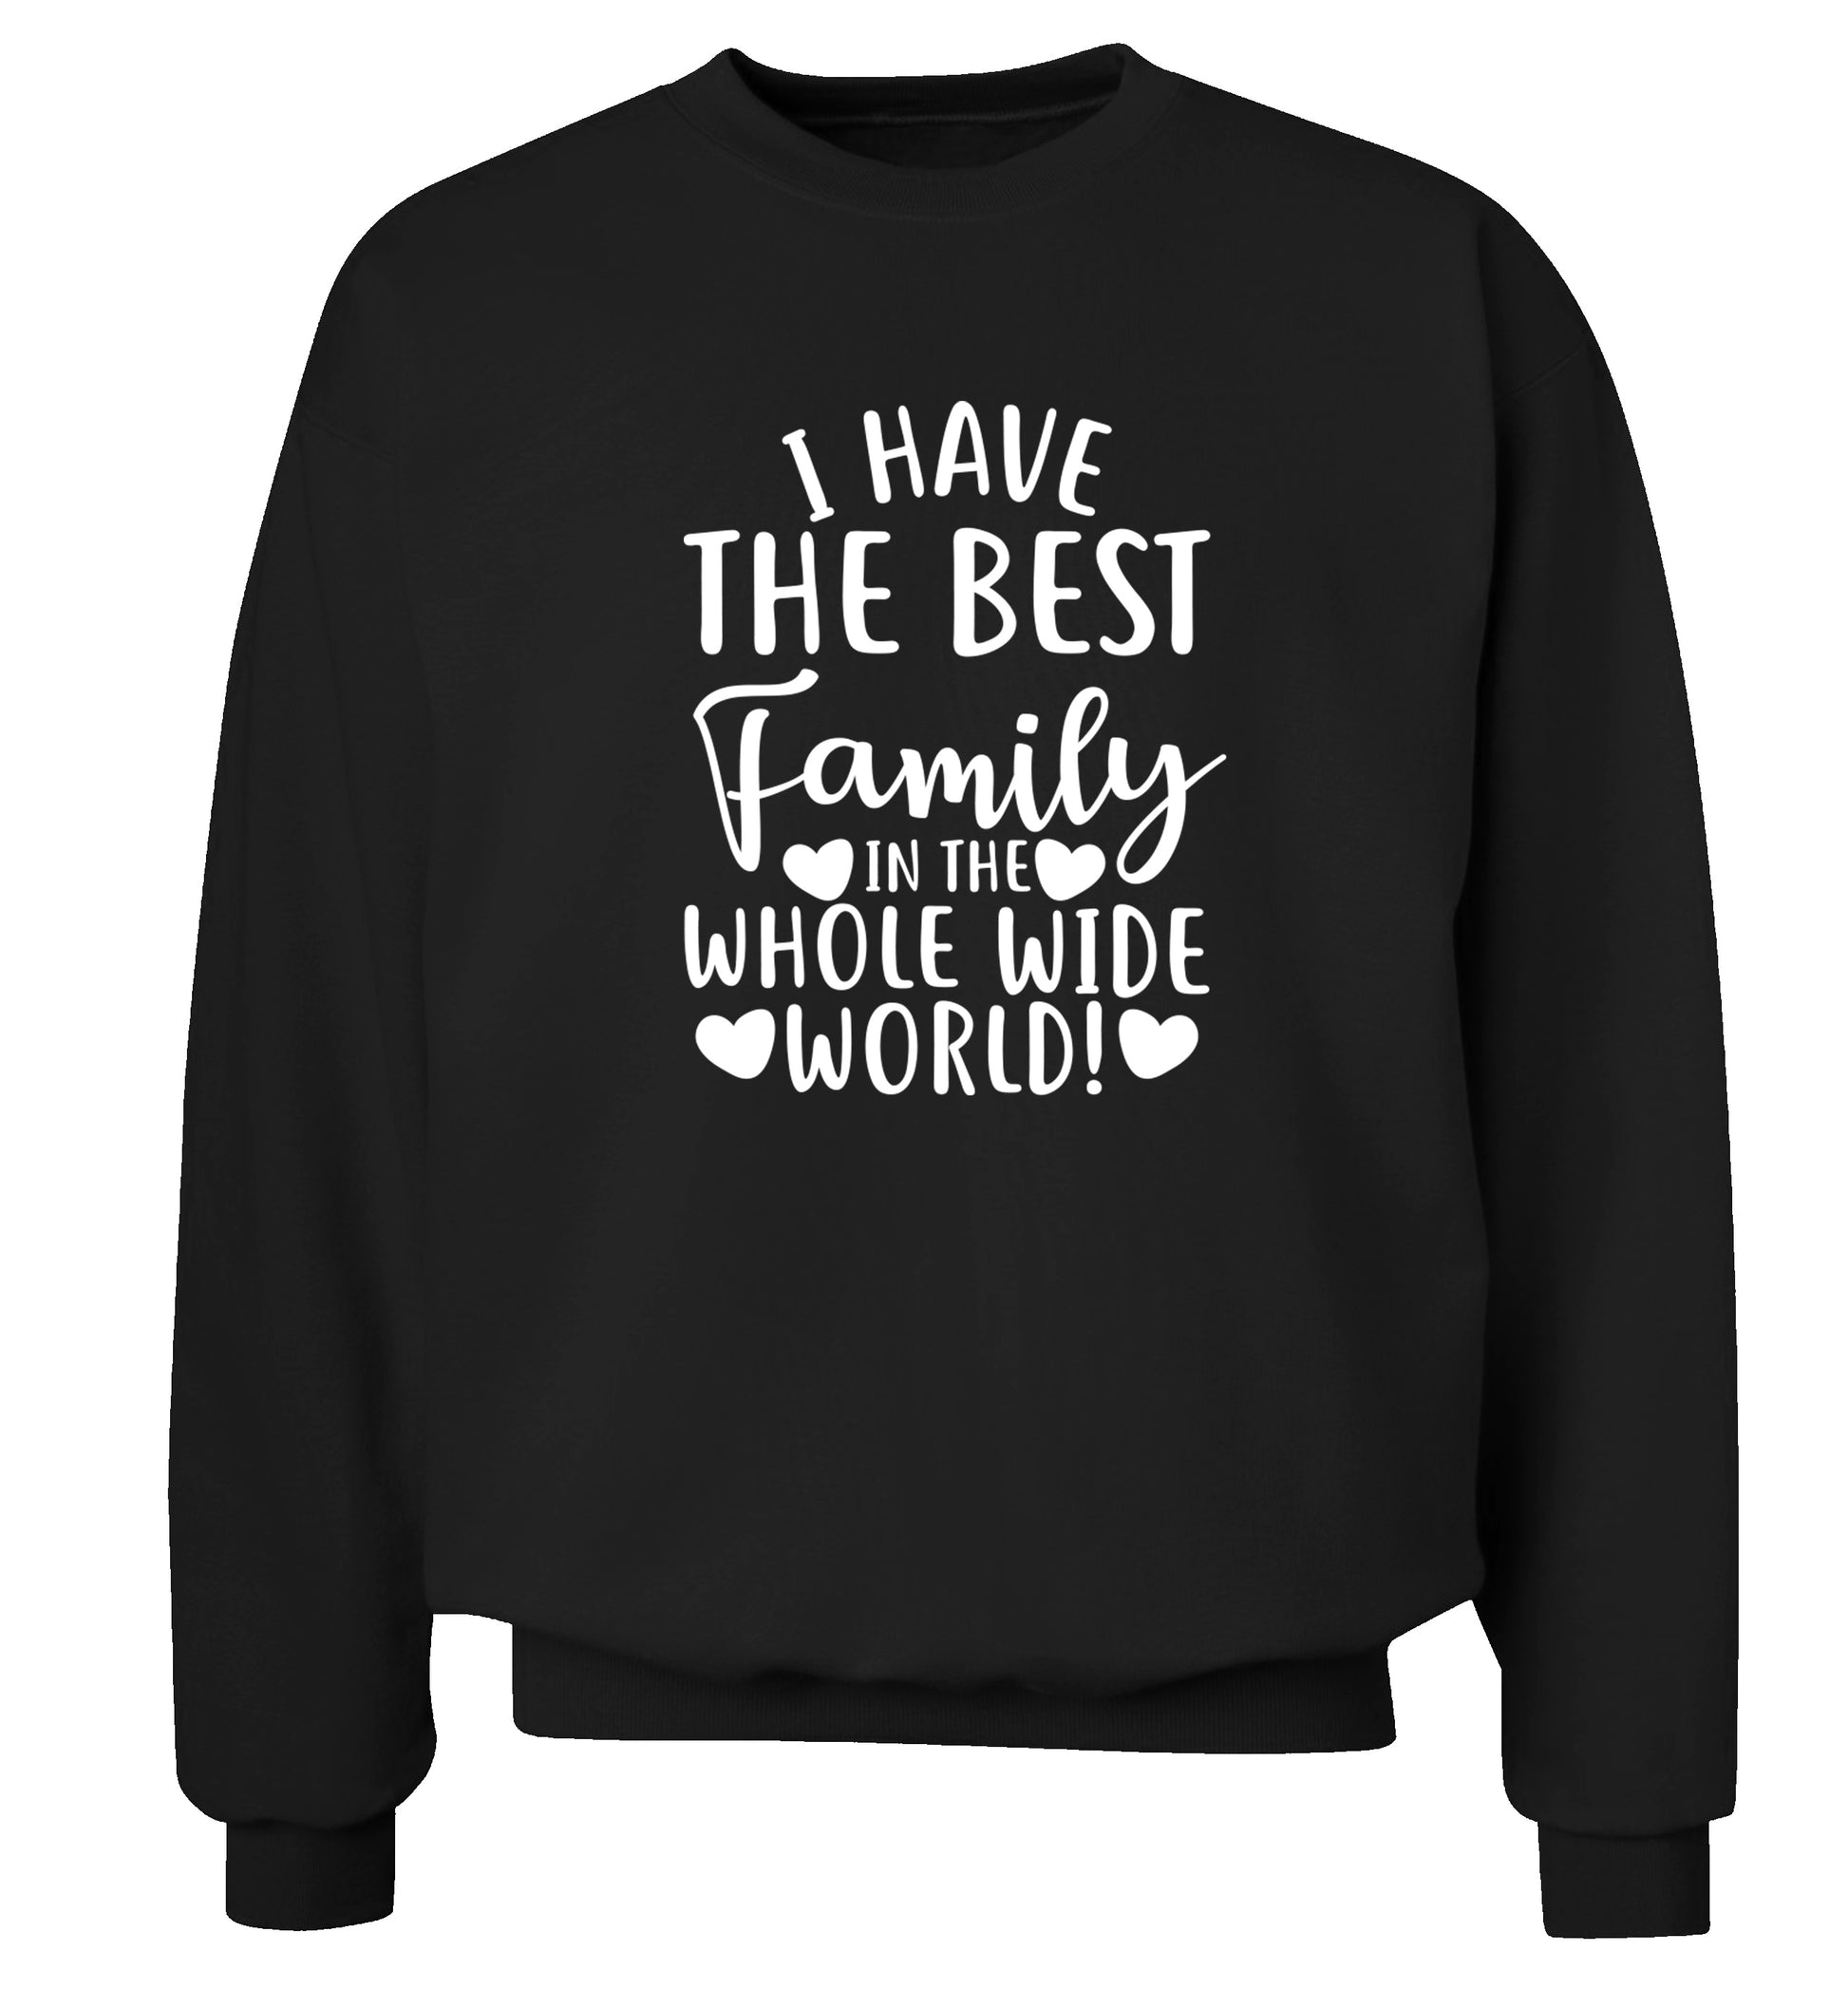 I have the best family in the whole wide world! Adult's unisex black Sweater 2XL